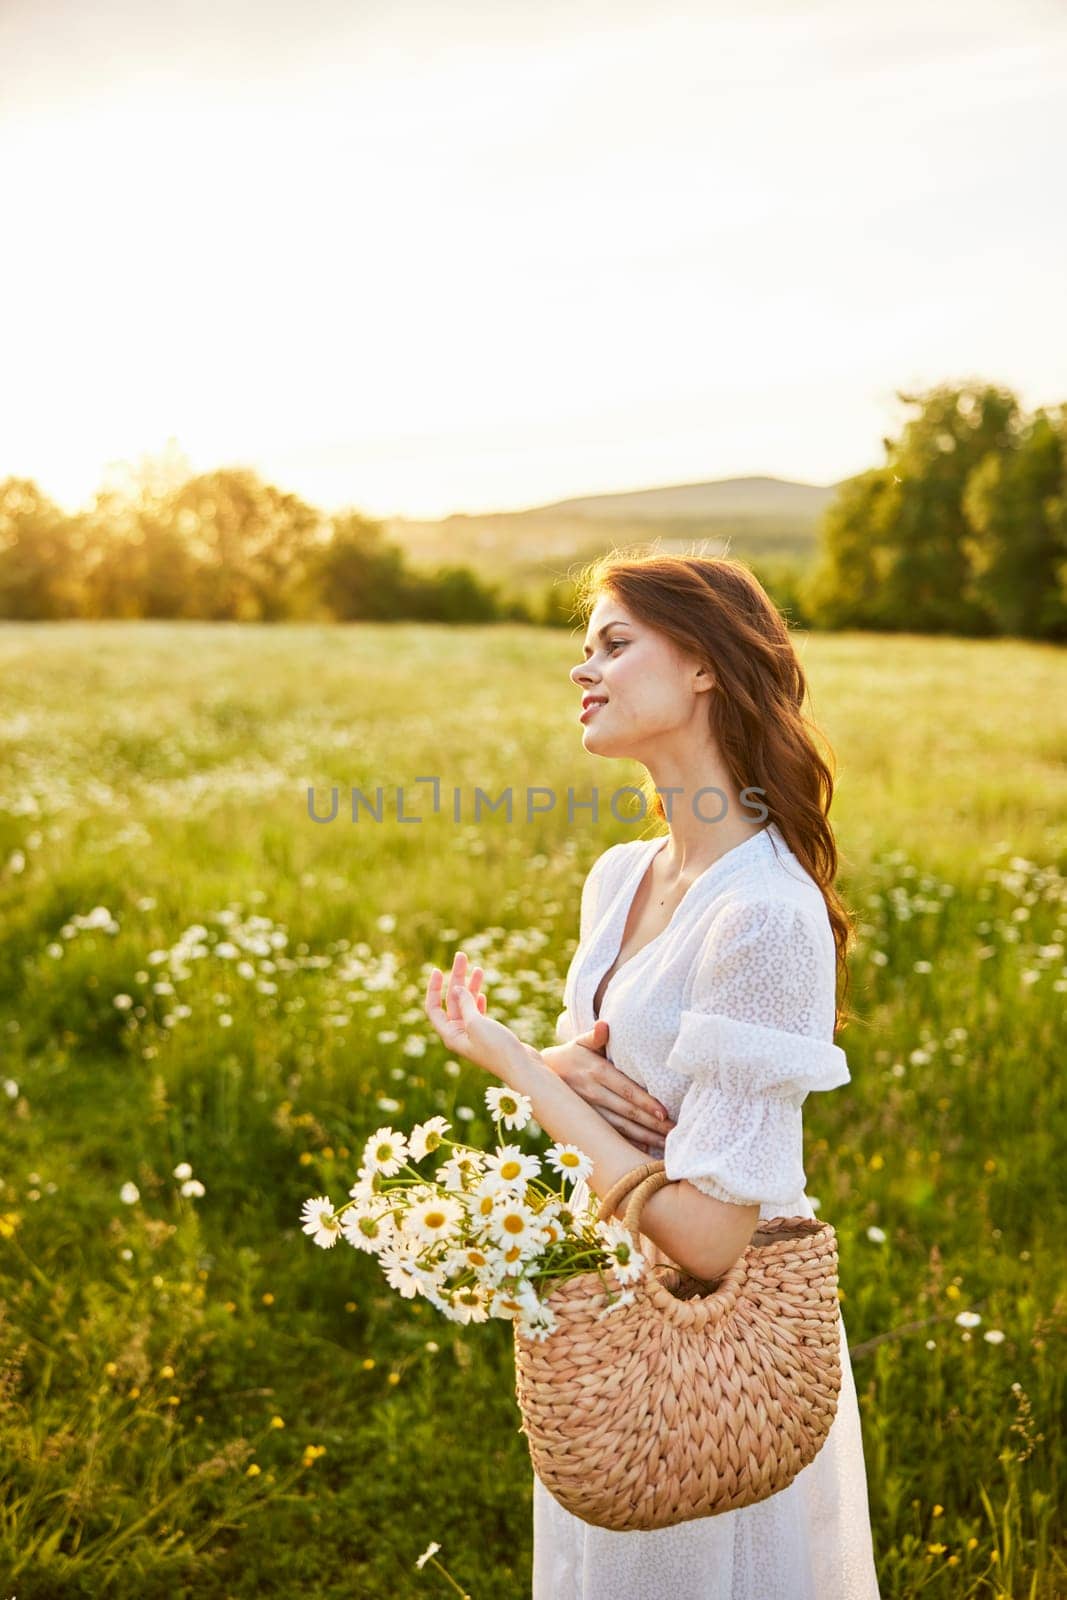 vertical portrait of a beautiful woman in a light dress with a basket full of daisies in nature. High quality photo